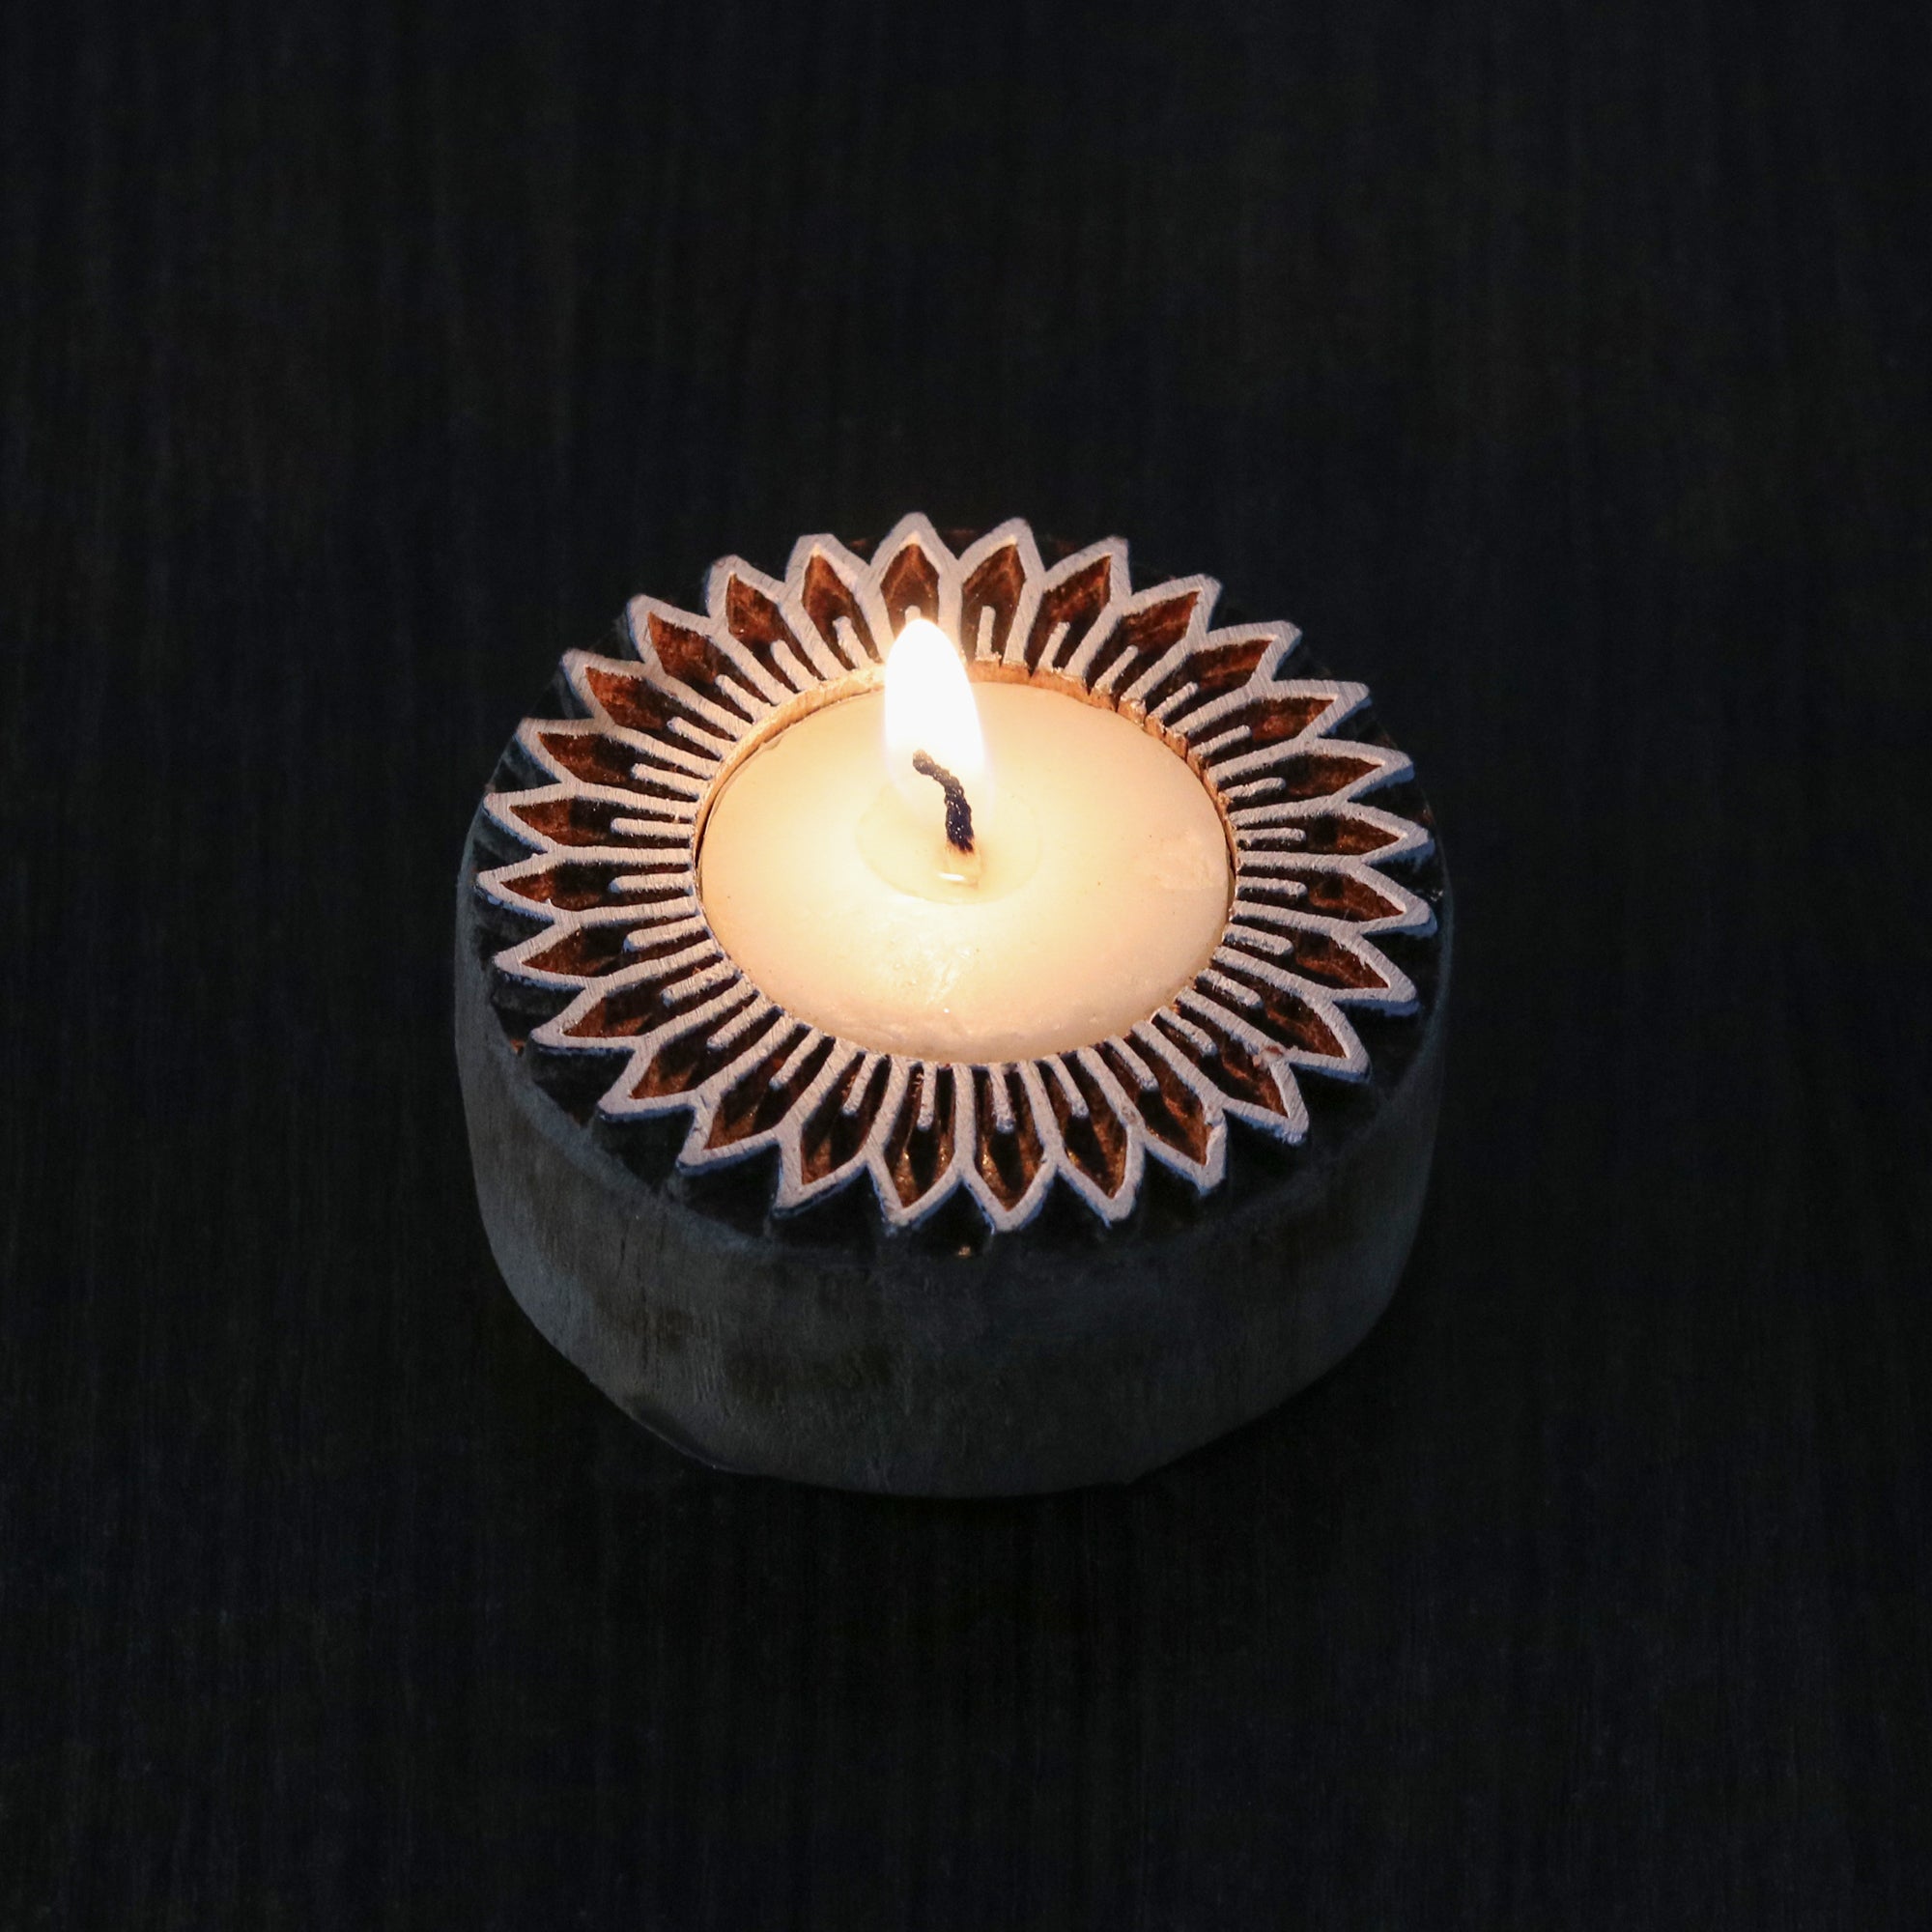 Wooden Printing Block & Candle Holder- Daisy